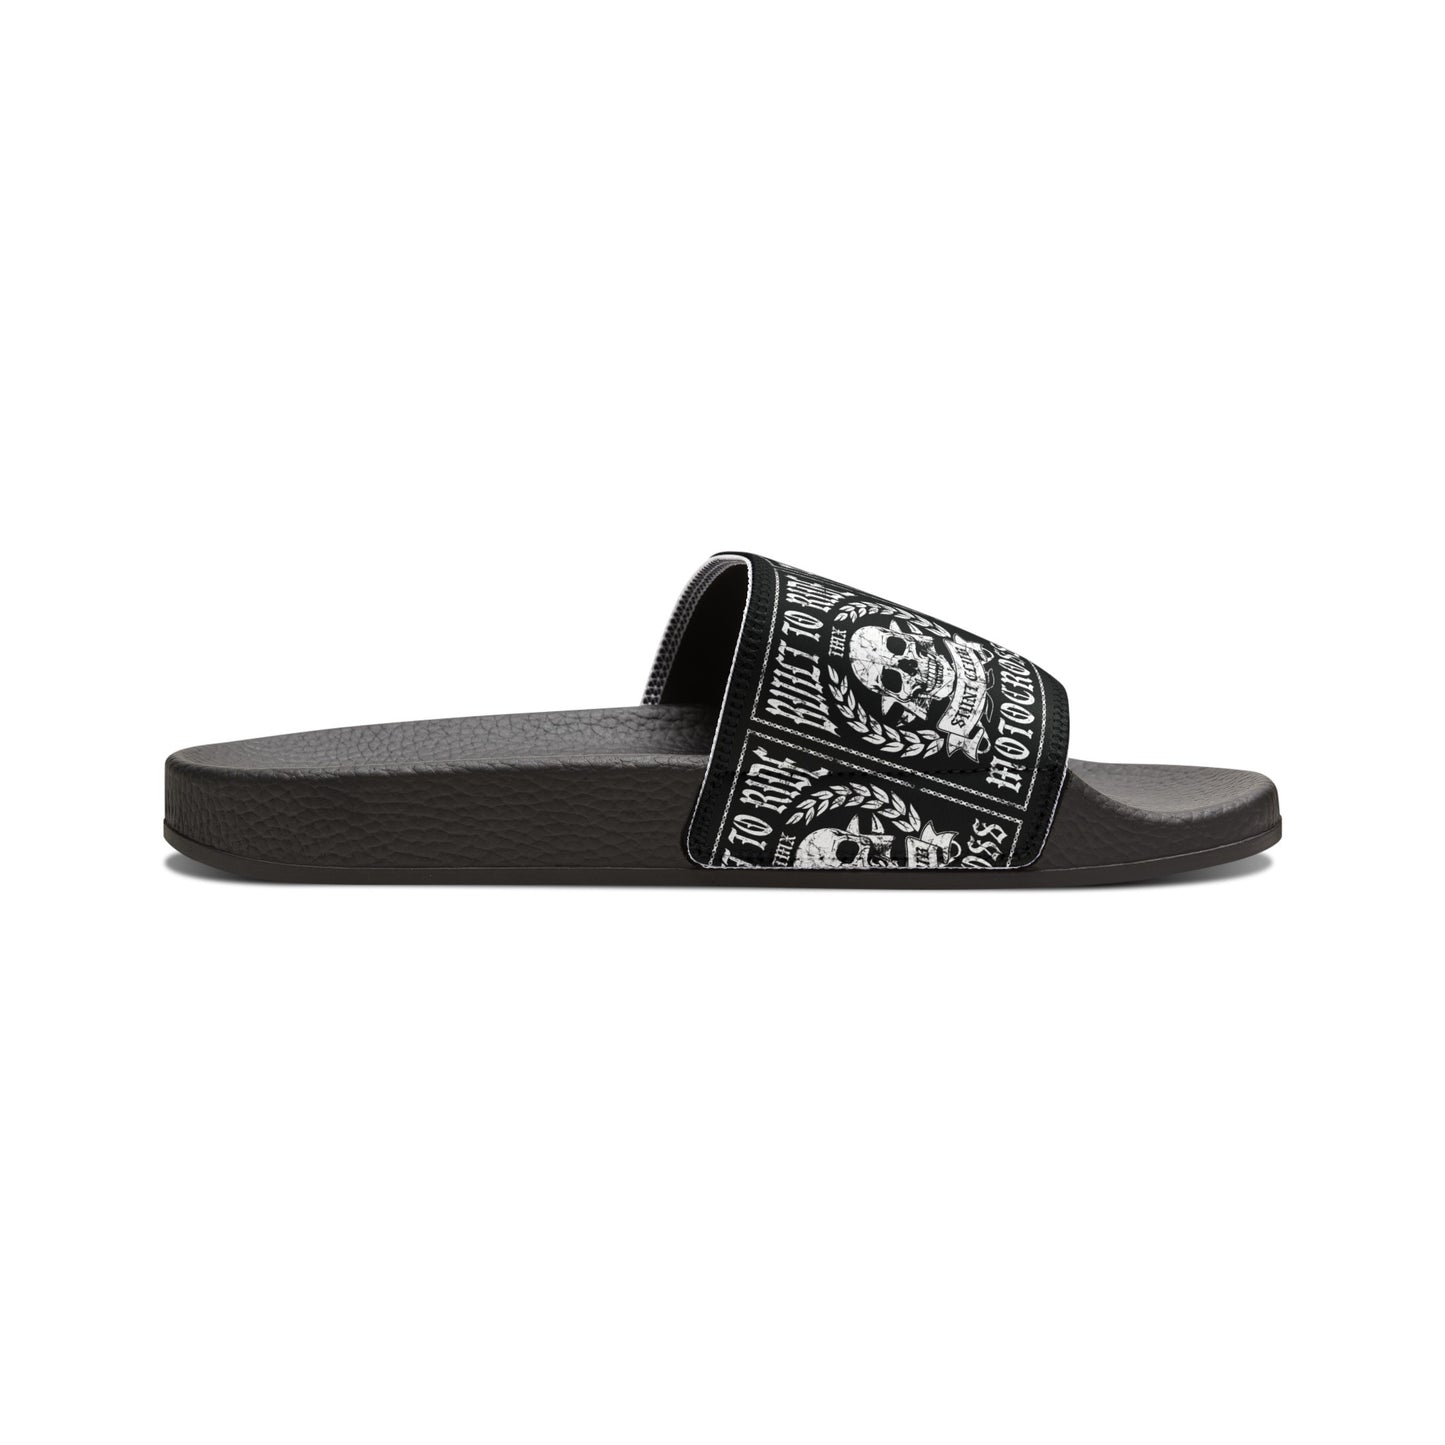 Built to Ride - Youth PU Slide Sandals - Blackout